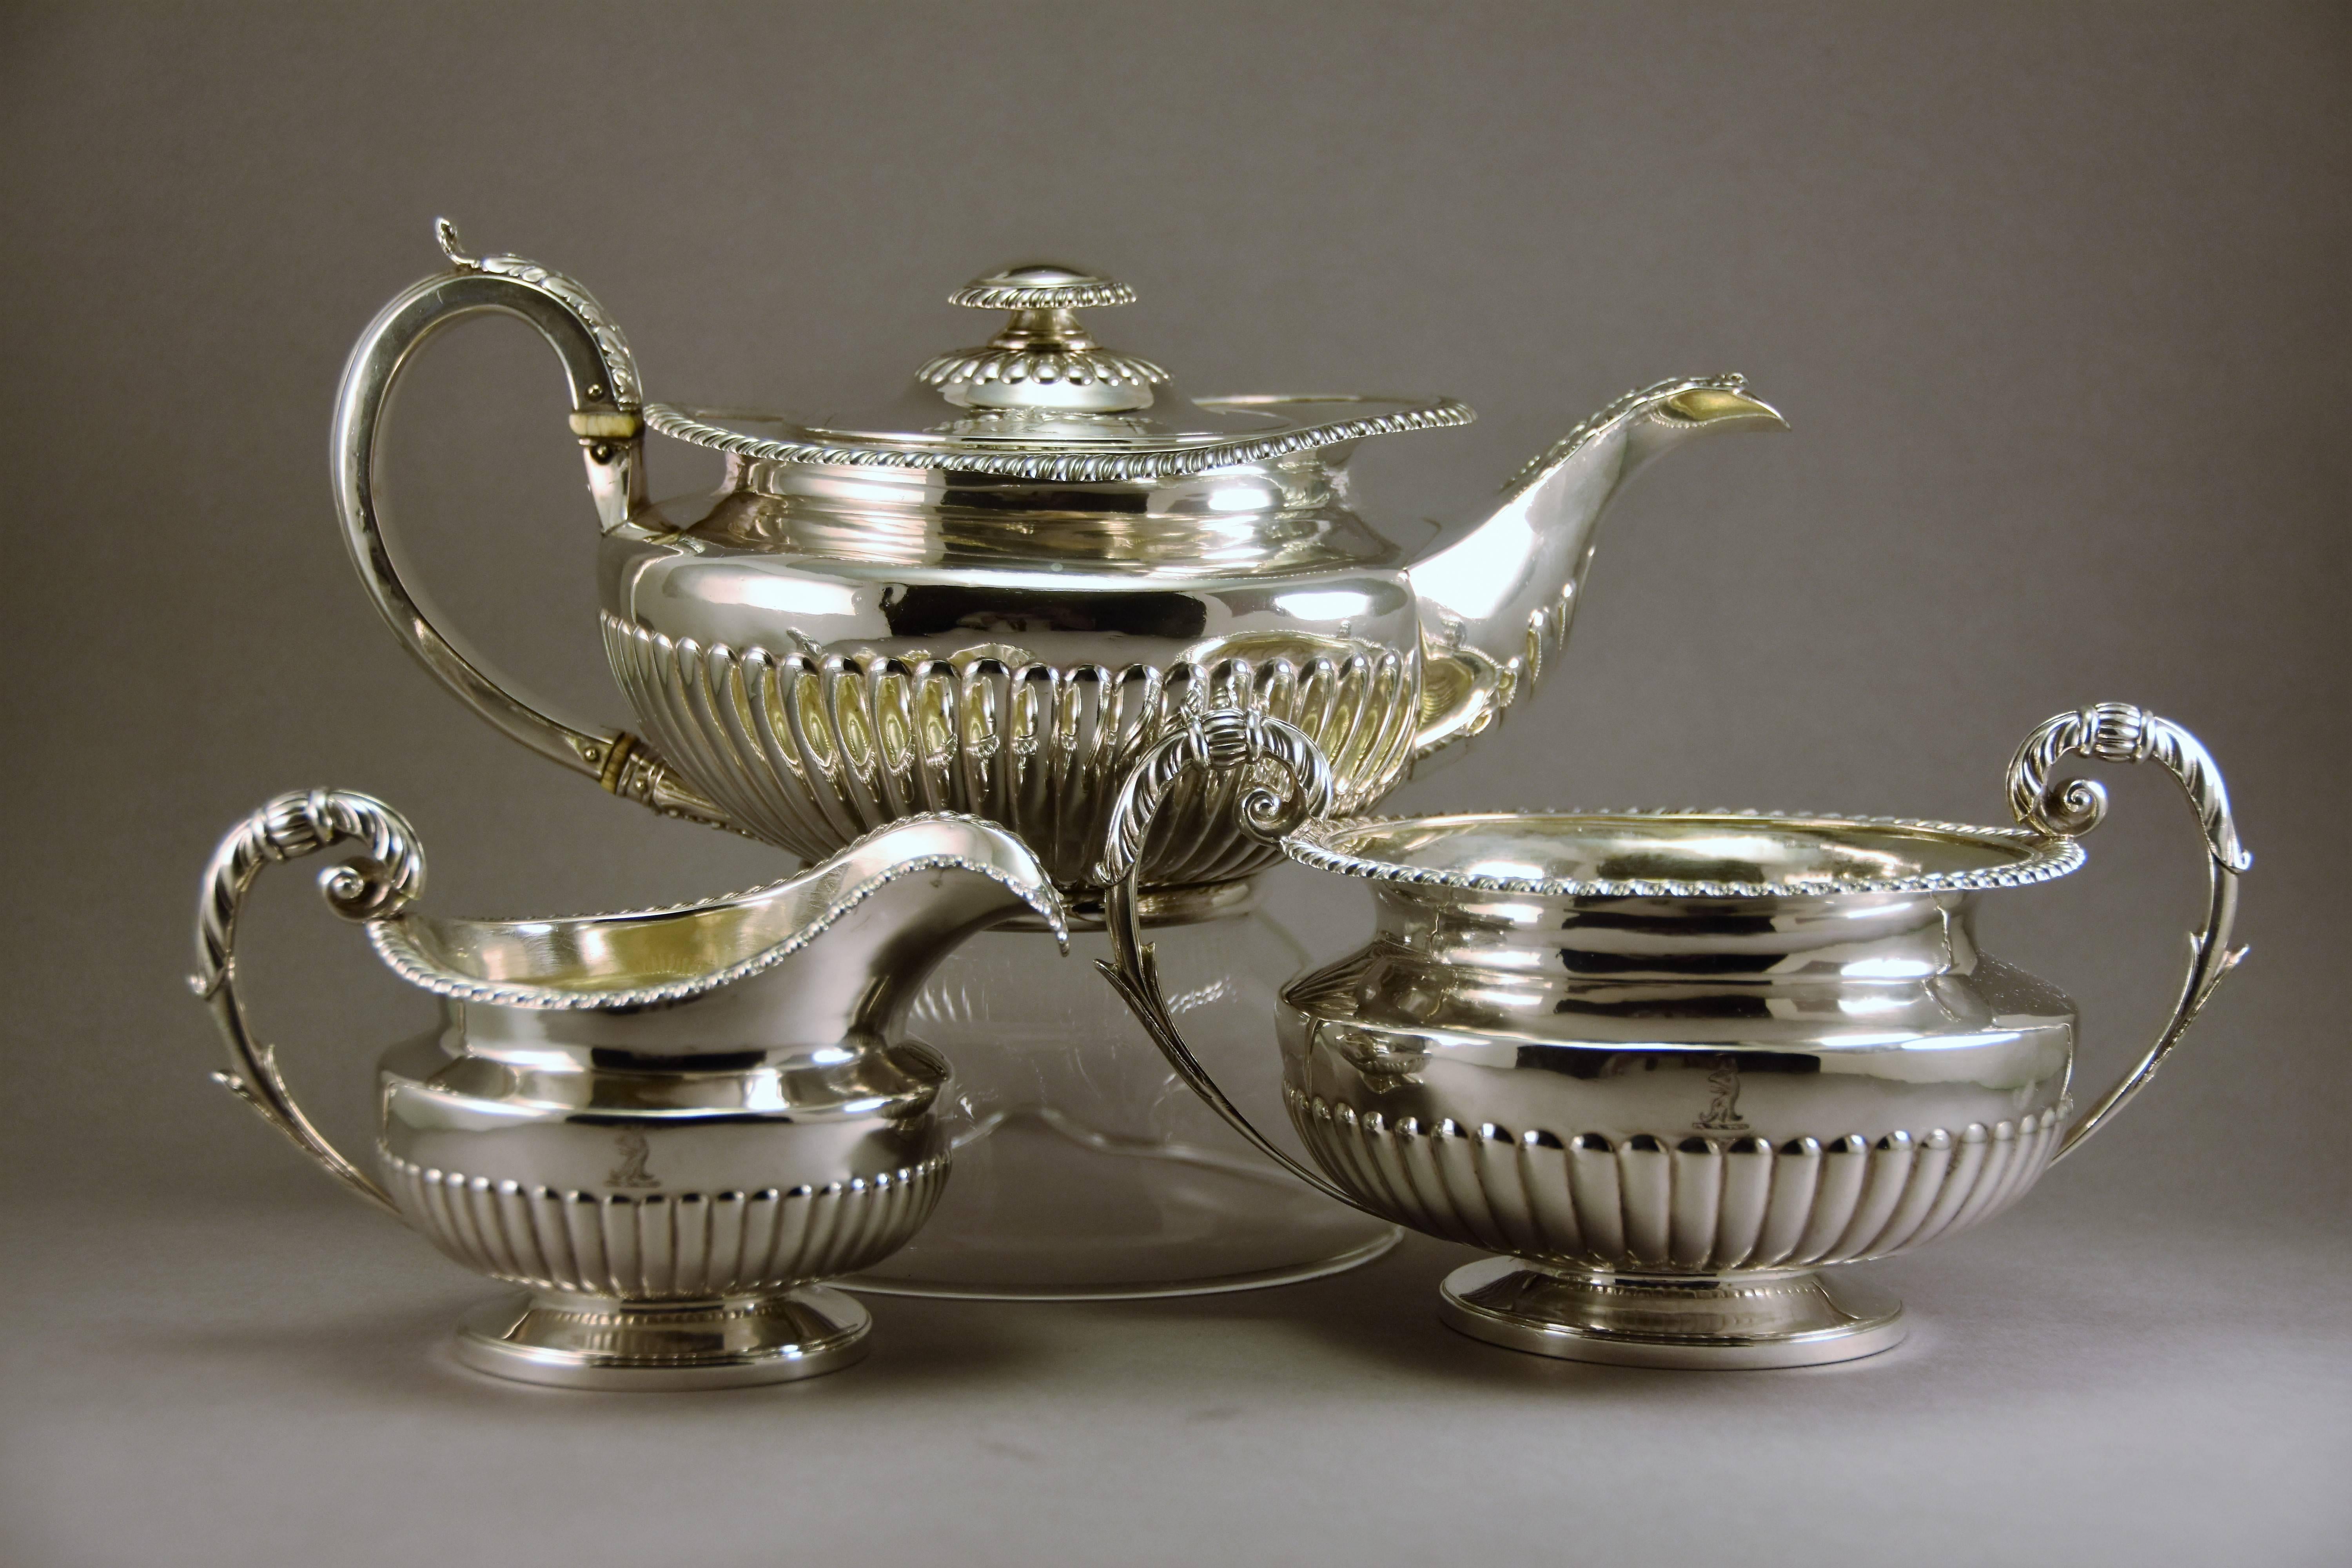 A superb quality, three-piece, George IV sterling silver tea set made in London by Rebecca Emes and Edward Barnard hallmarked and dated 1823

Compressed circular design, with prow lip, half reeded, beneath scallop shell rims and acanthus leaves.